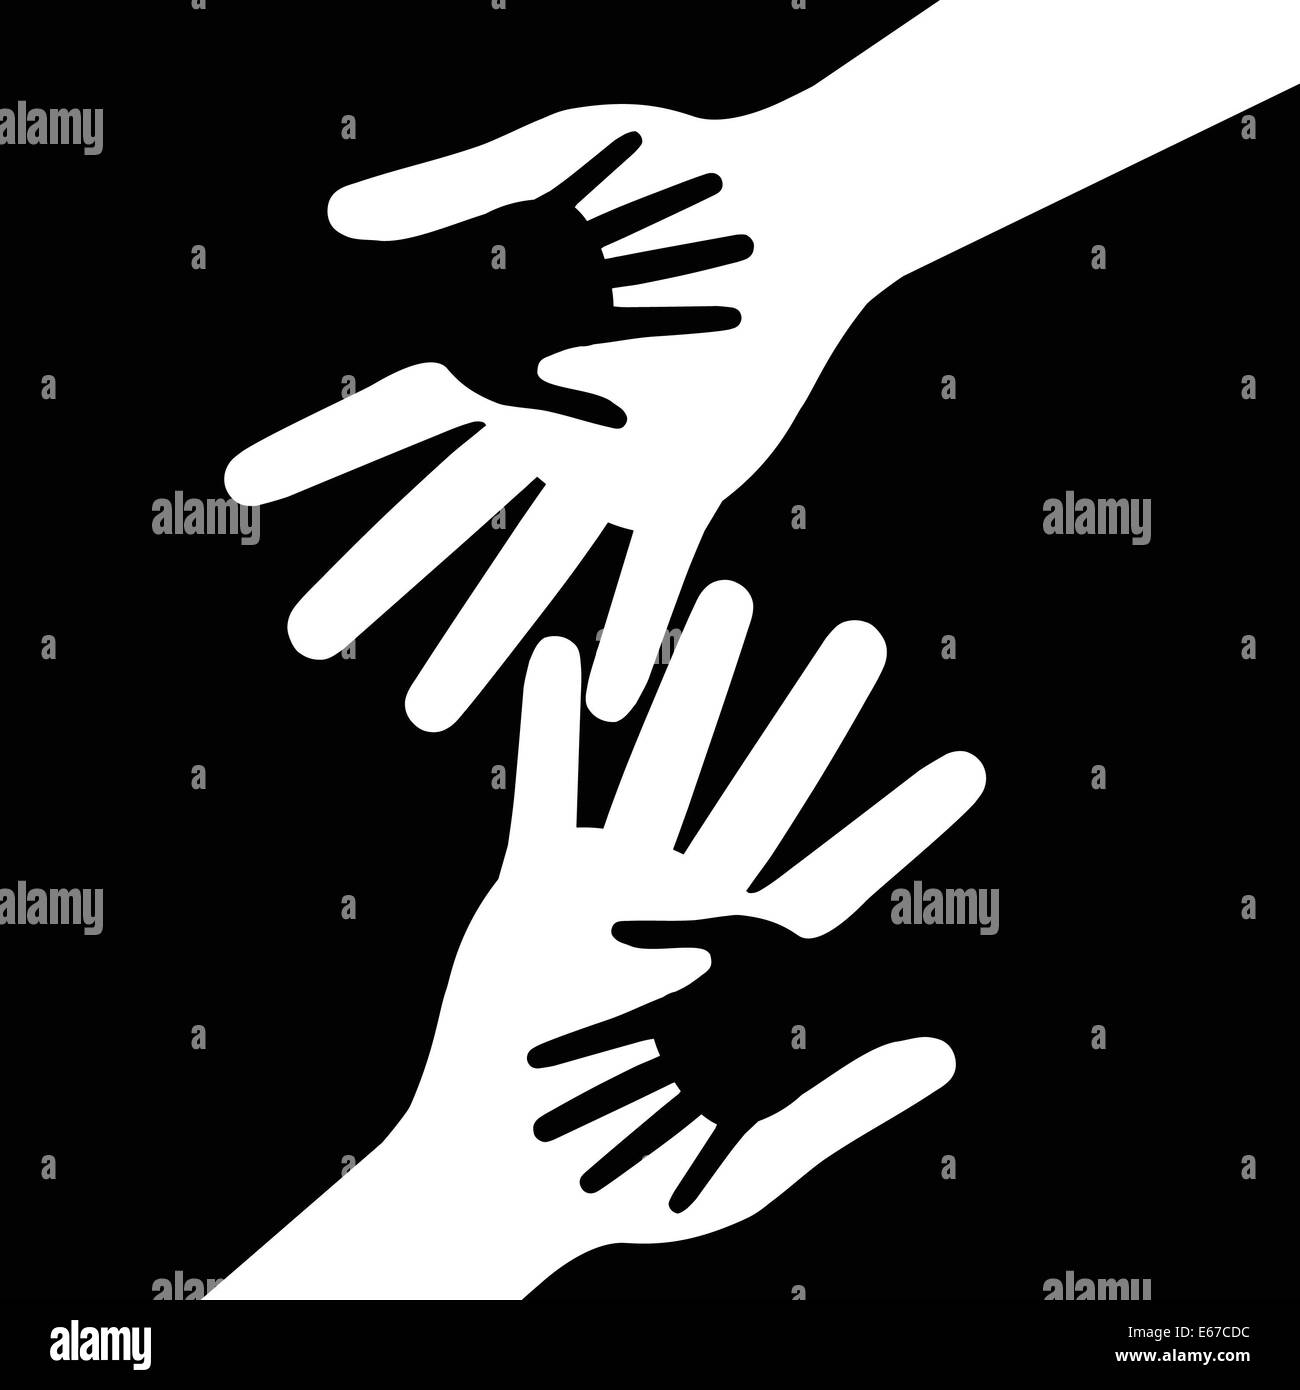 Holding Hands Meaning Bonding Offspring And Child Stock Photo